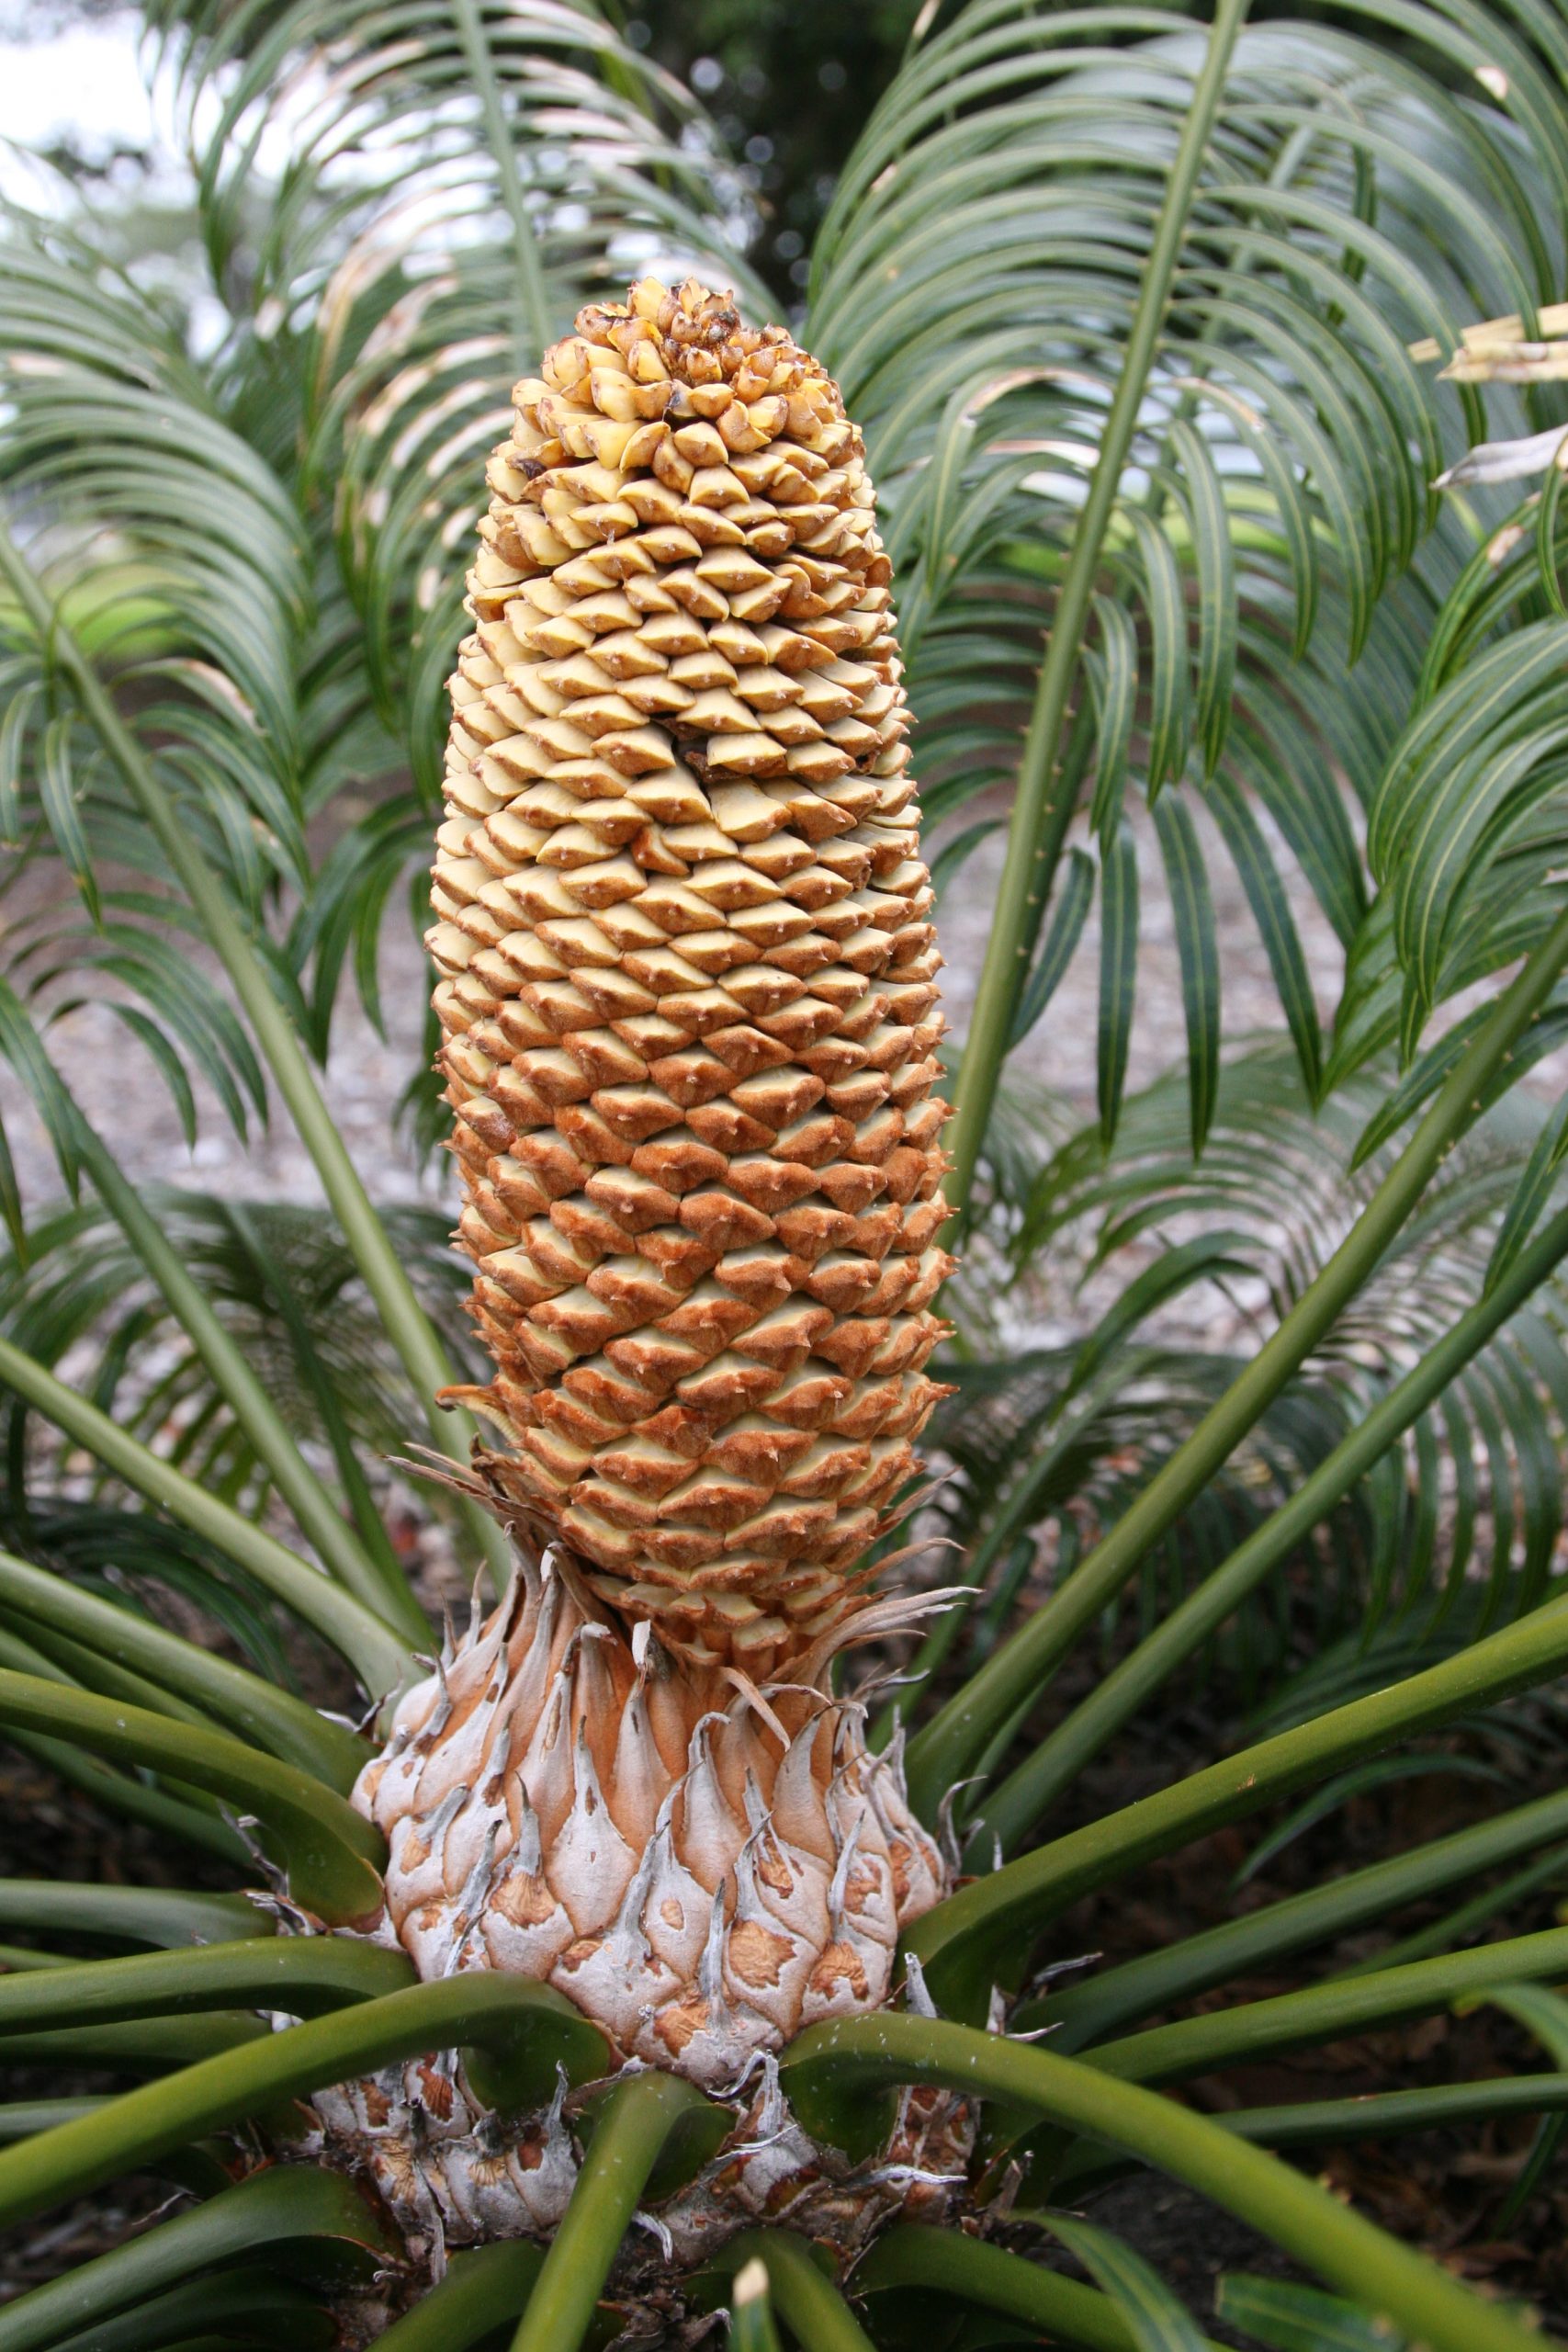 Cycad cone developing on a male plant.